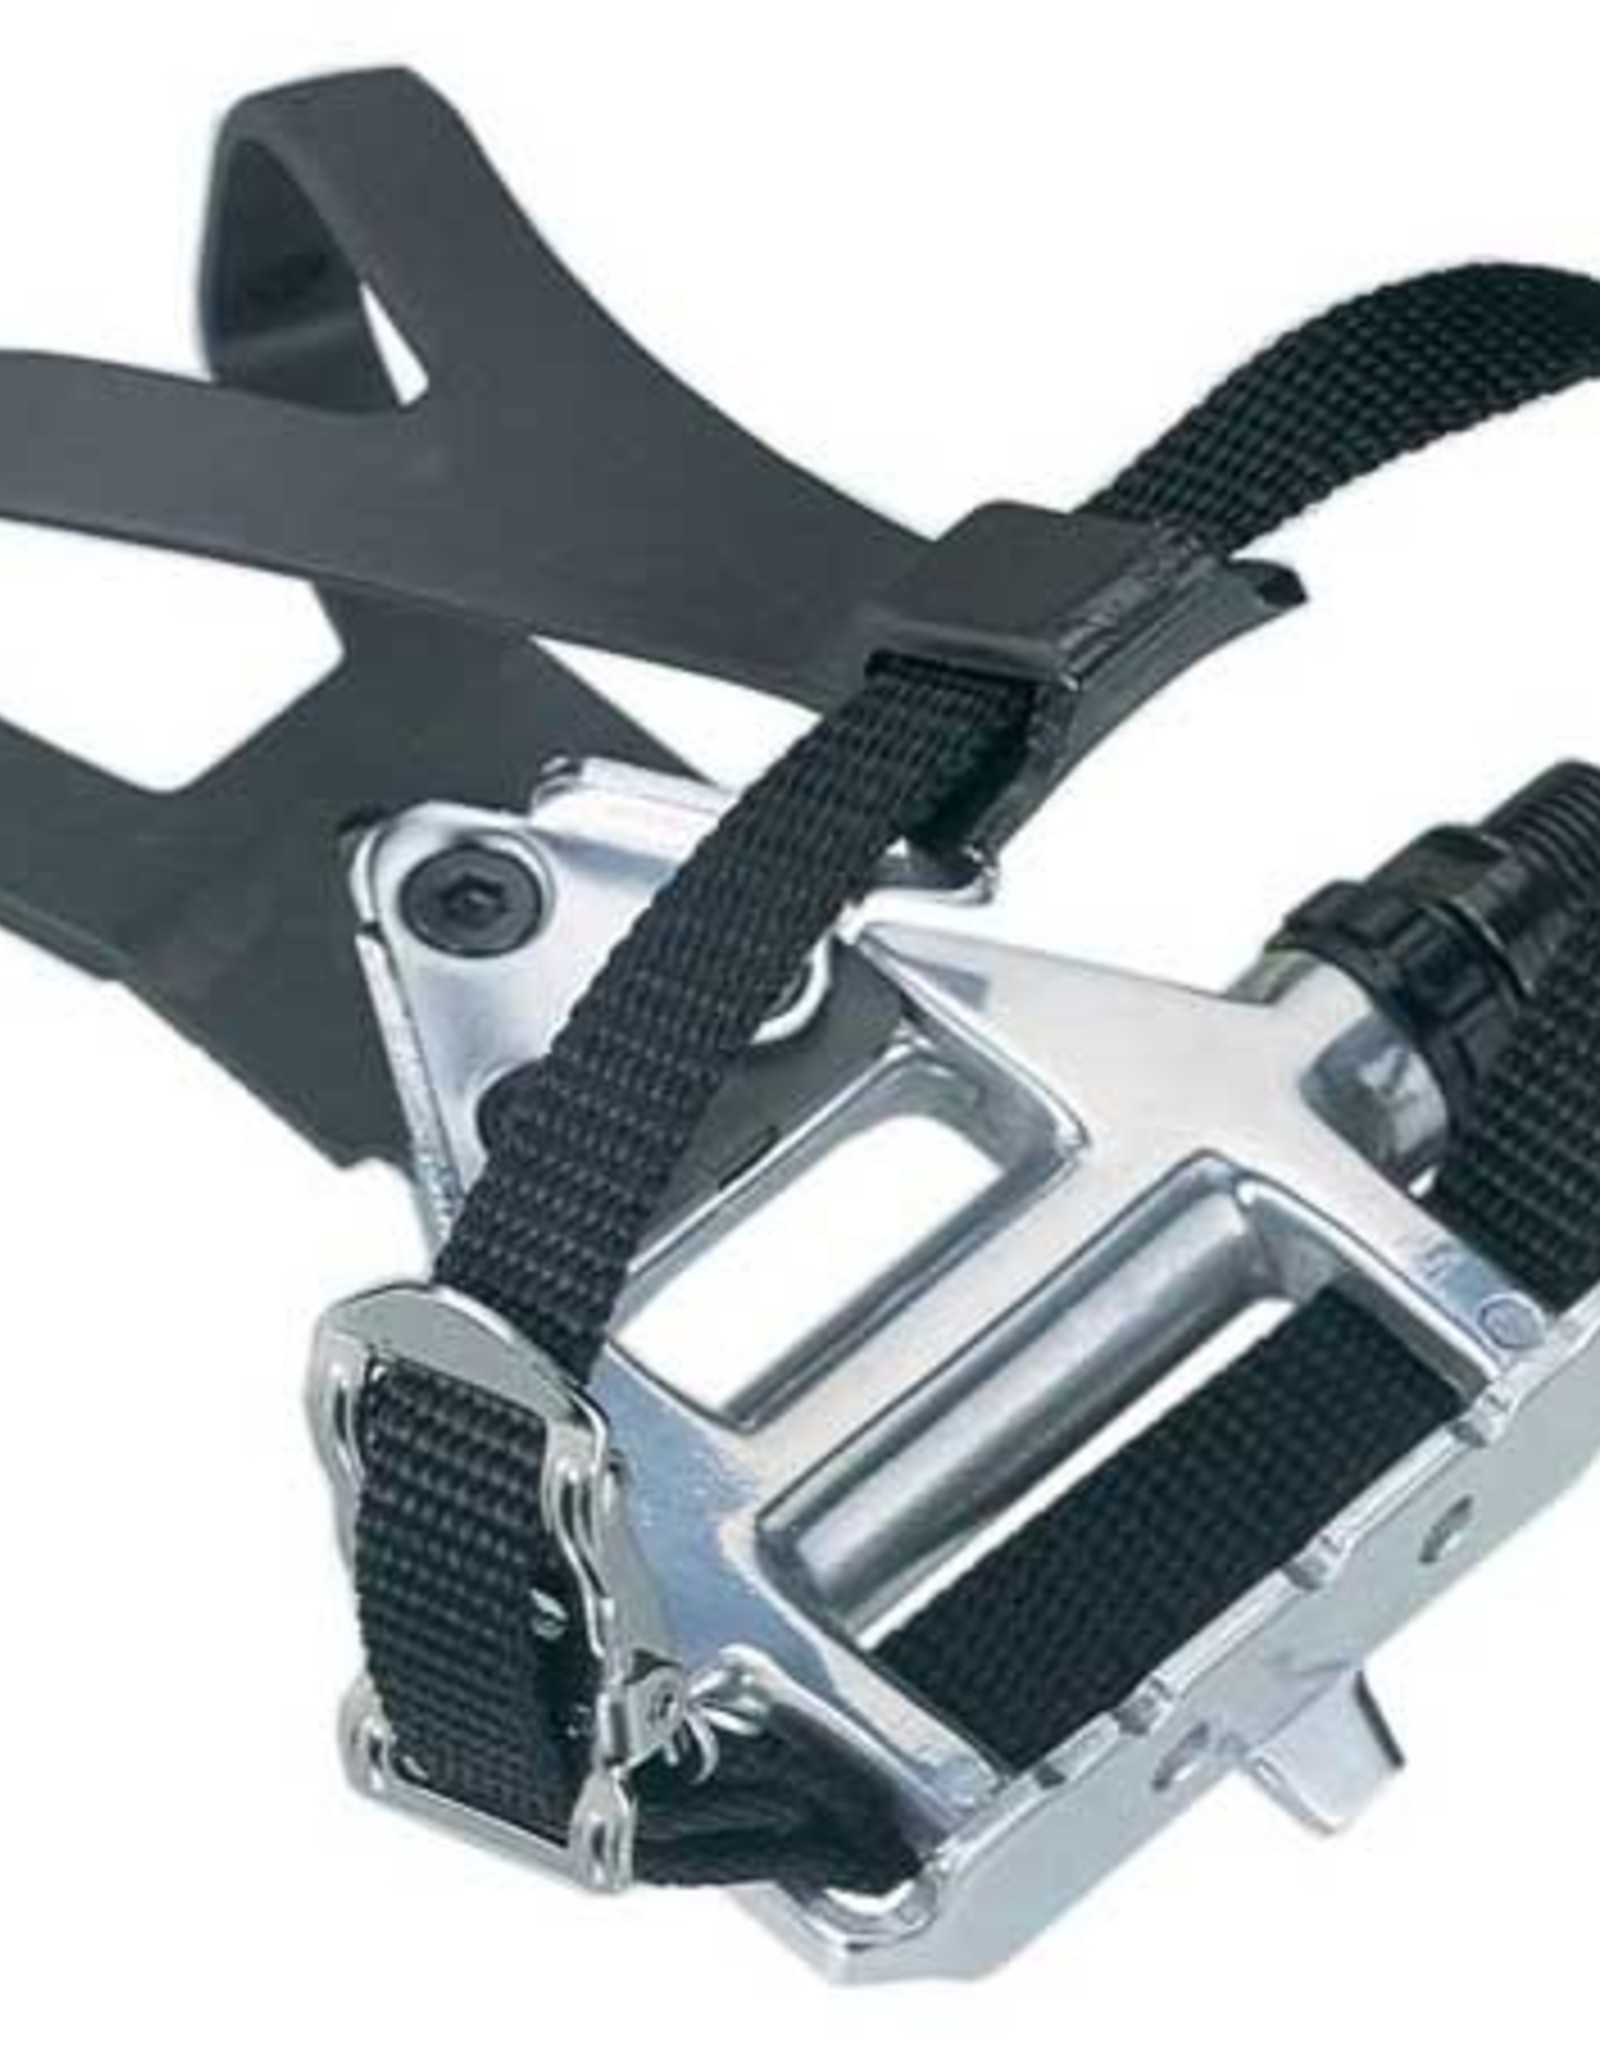 Wellgo LU961 Alloy Road Pedals with Clips and Straps